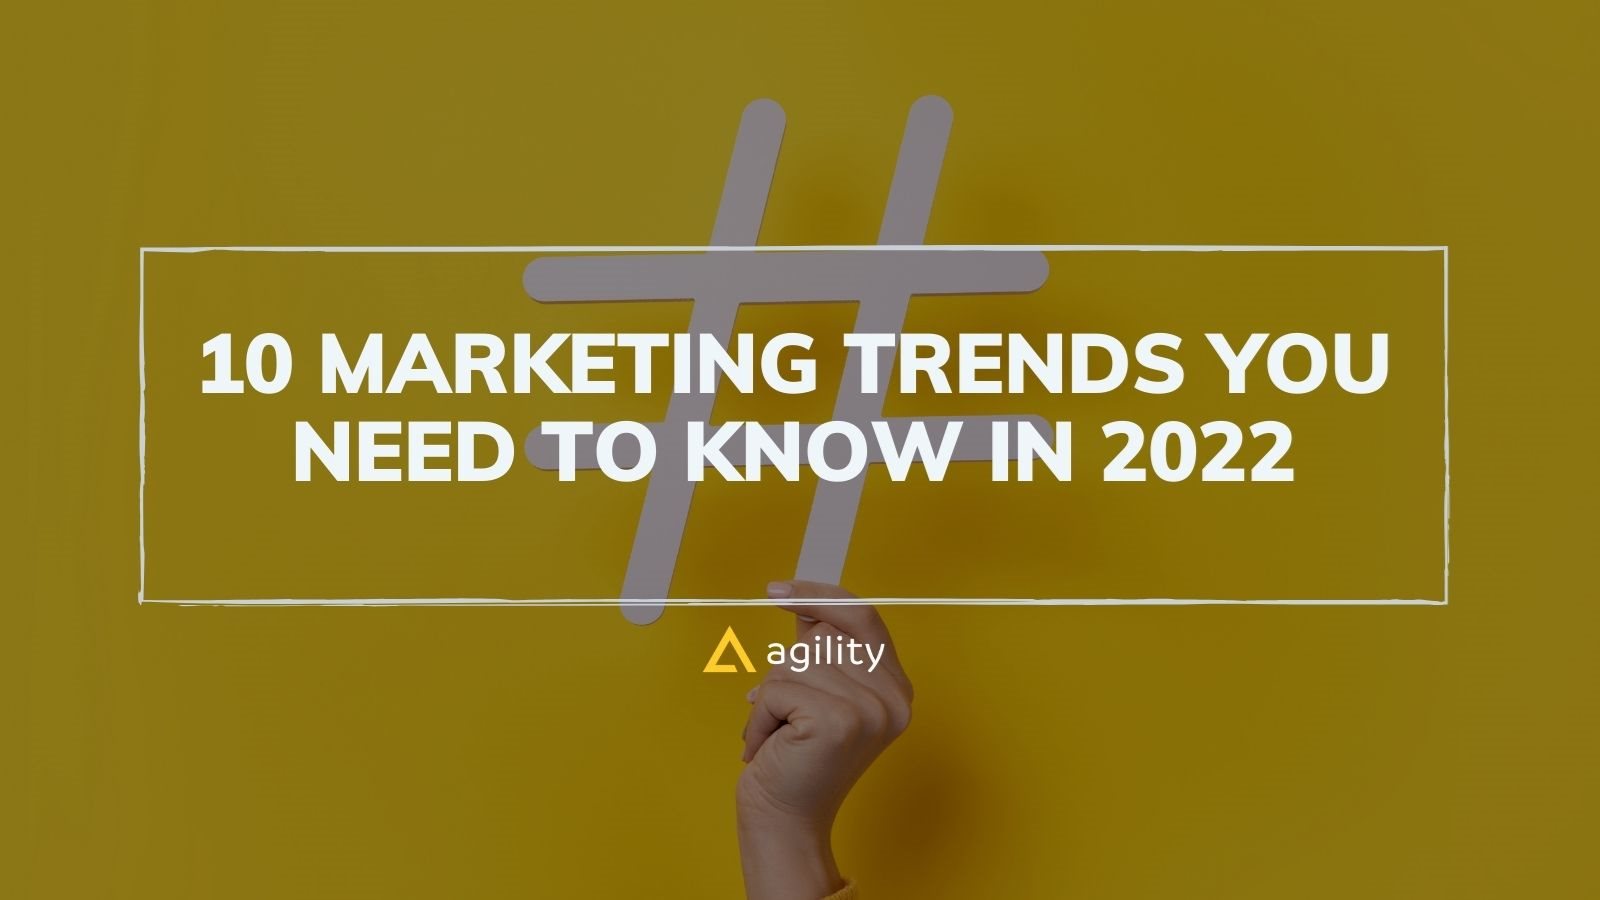 10 Marketing Trends You Need To Know In 2022